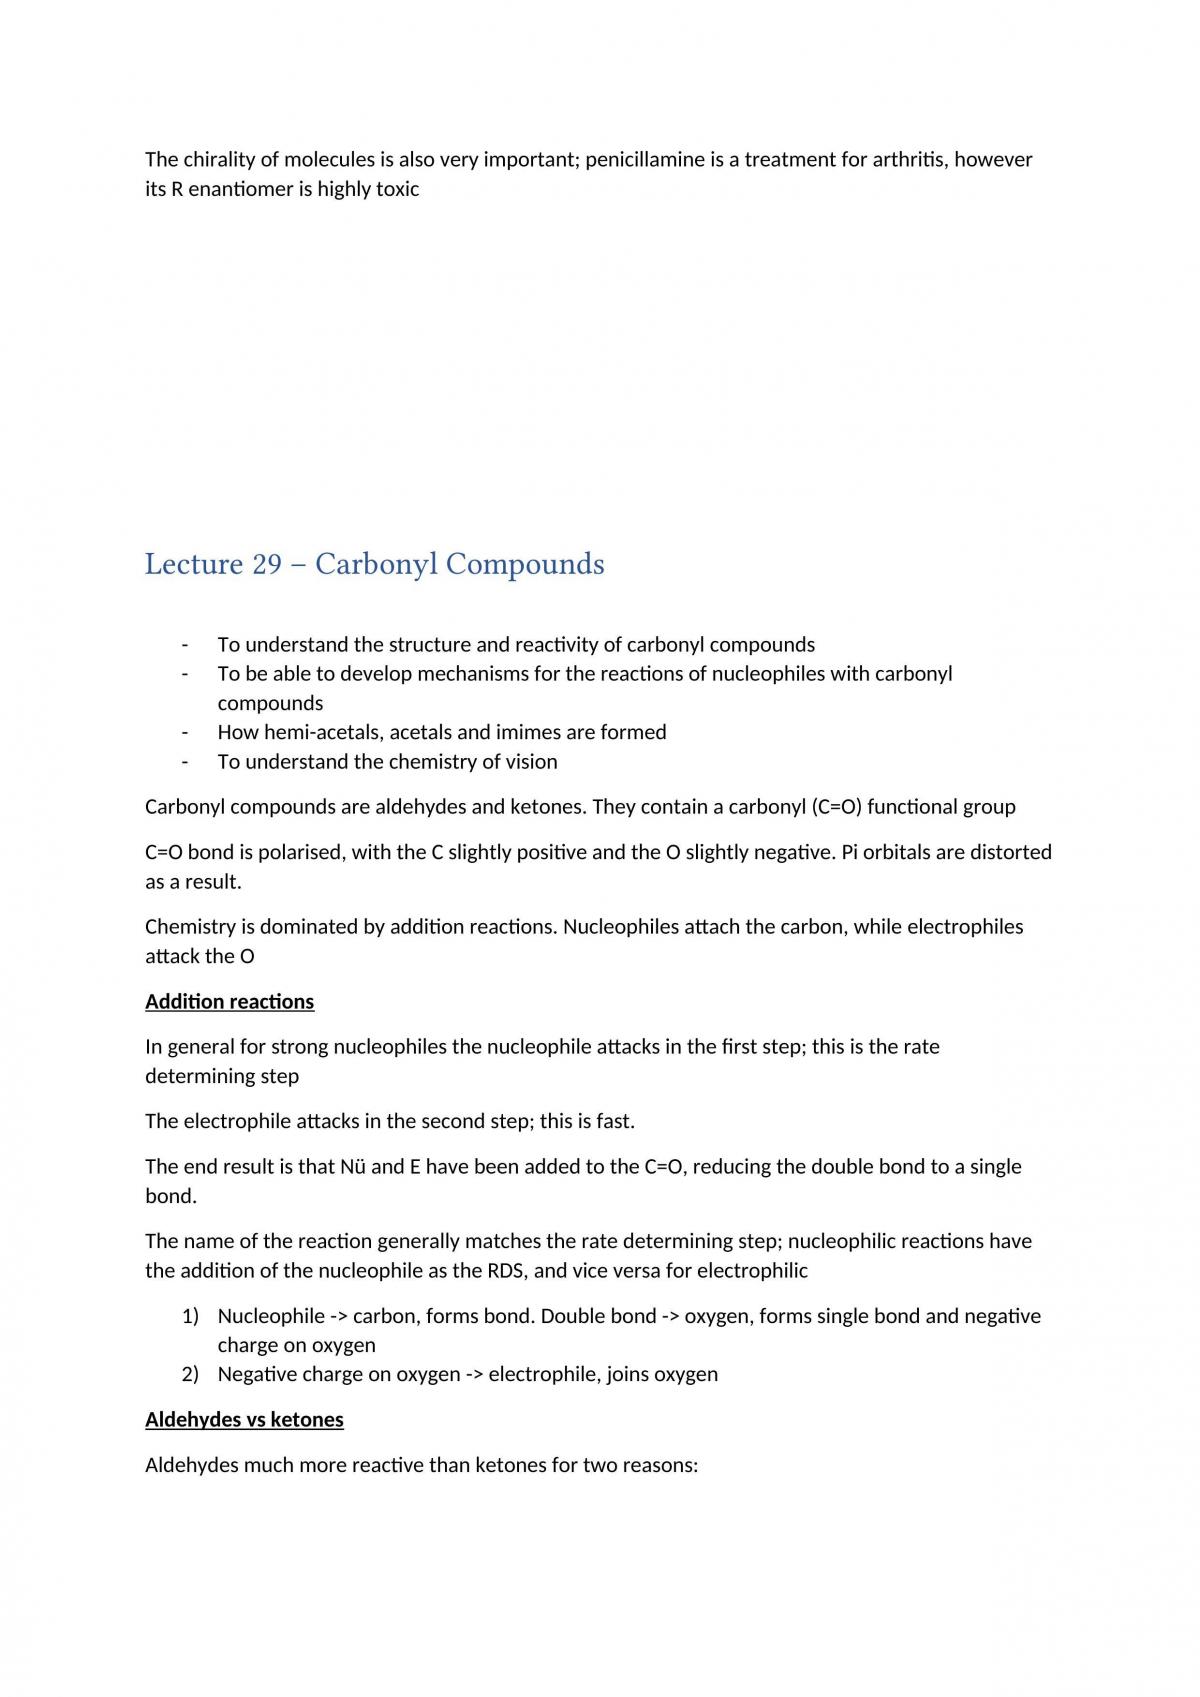 CHEM191 (The Chemical Basis of Biology and Human Health) complete set of study notes - Page 43